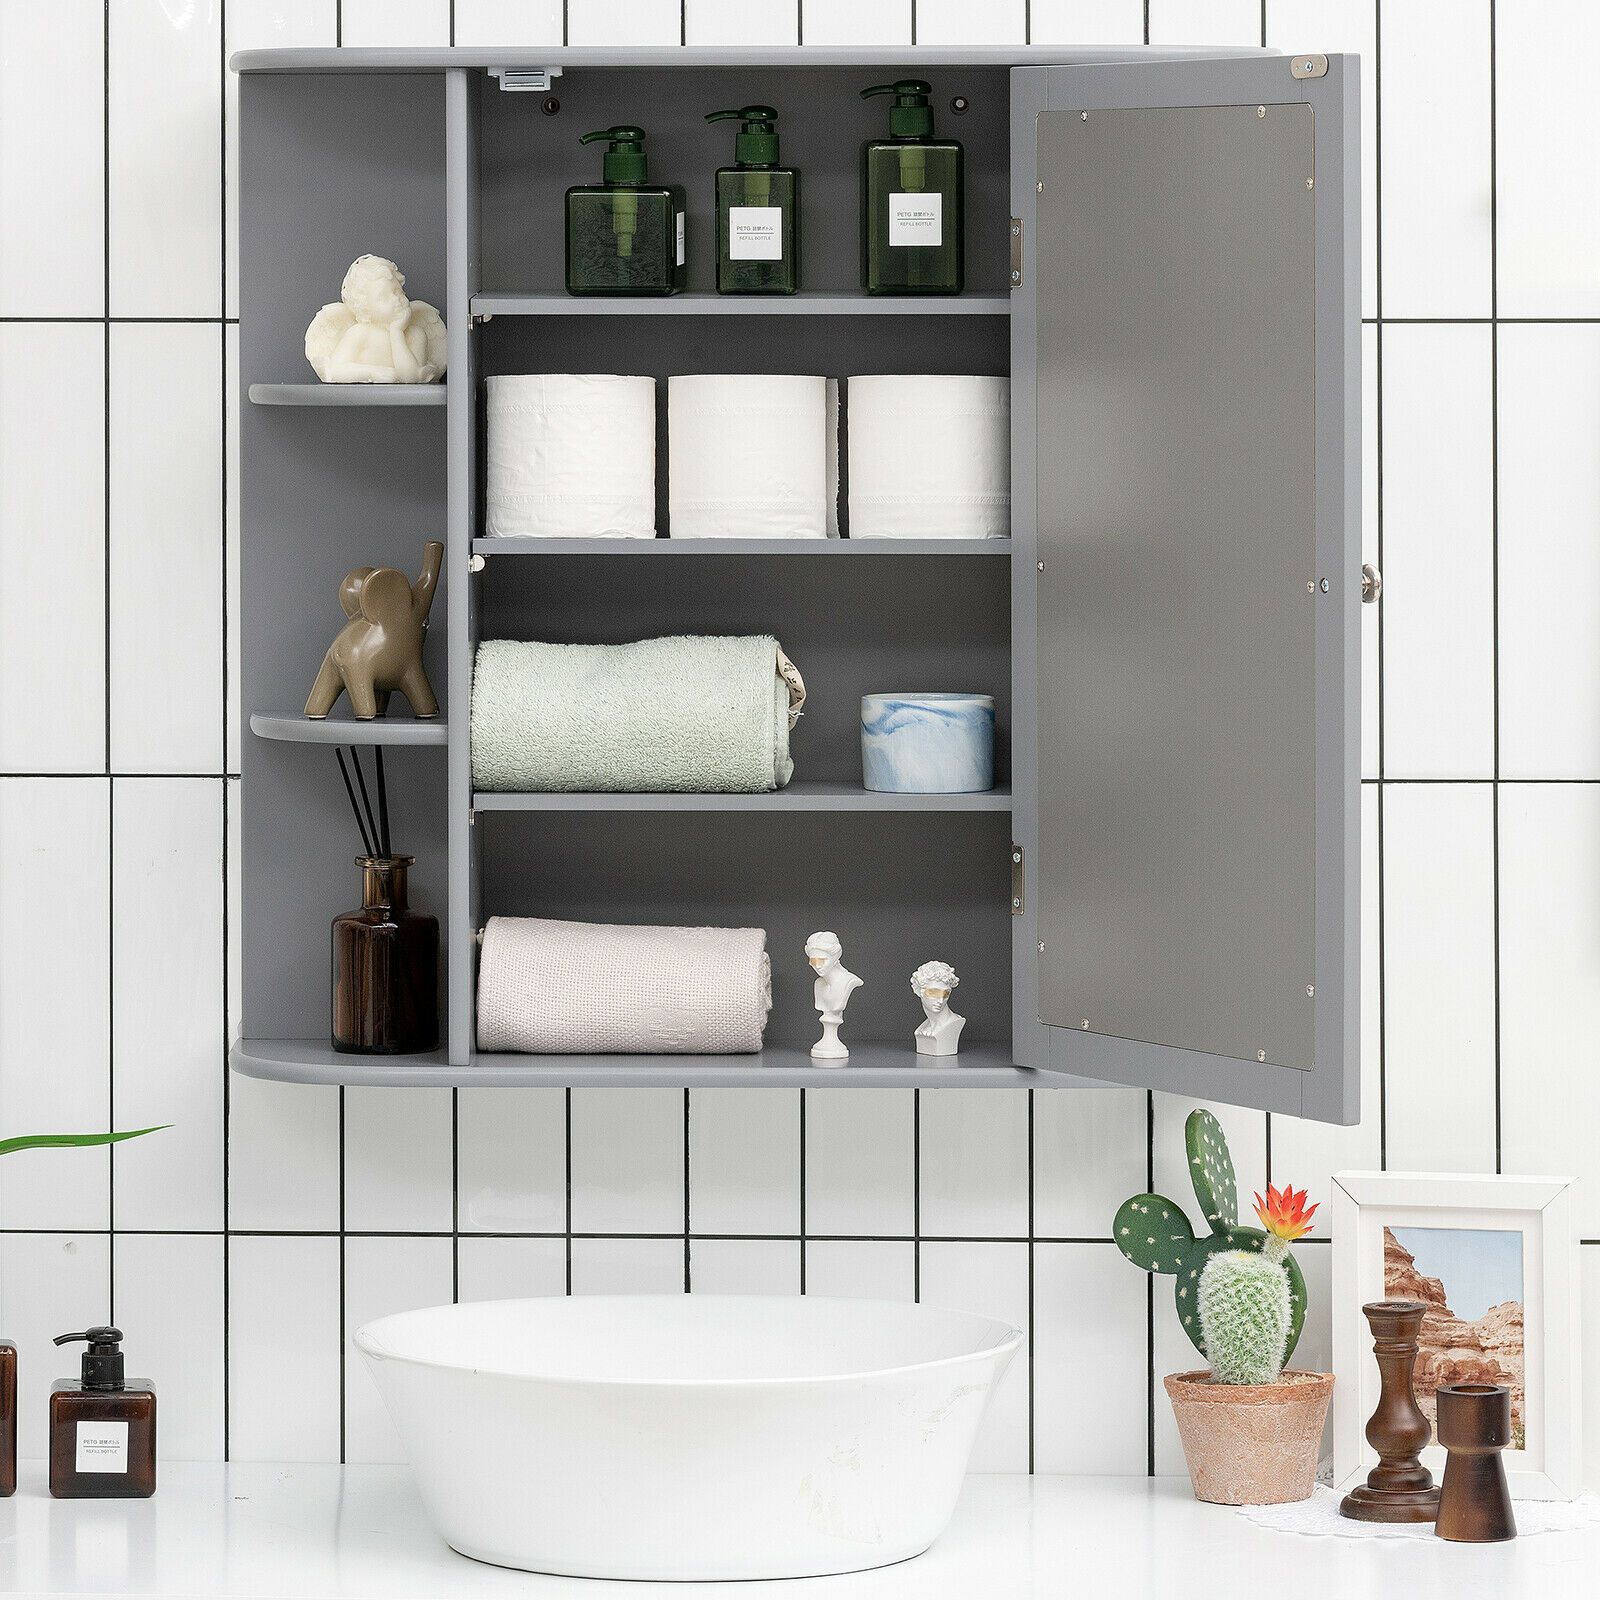 3-Tier Mirrored Wall Mounted Bathroom Cabinet